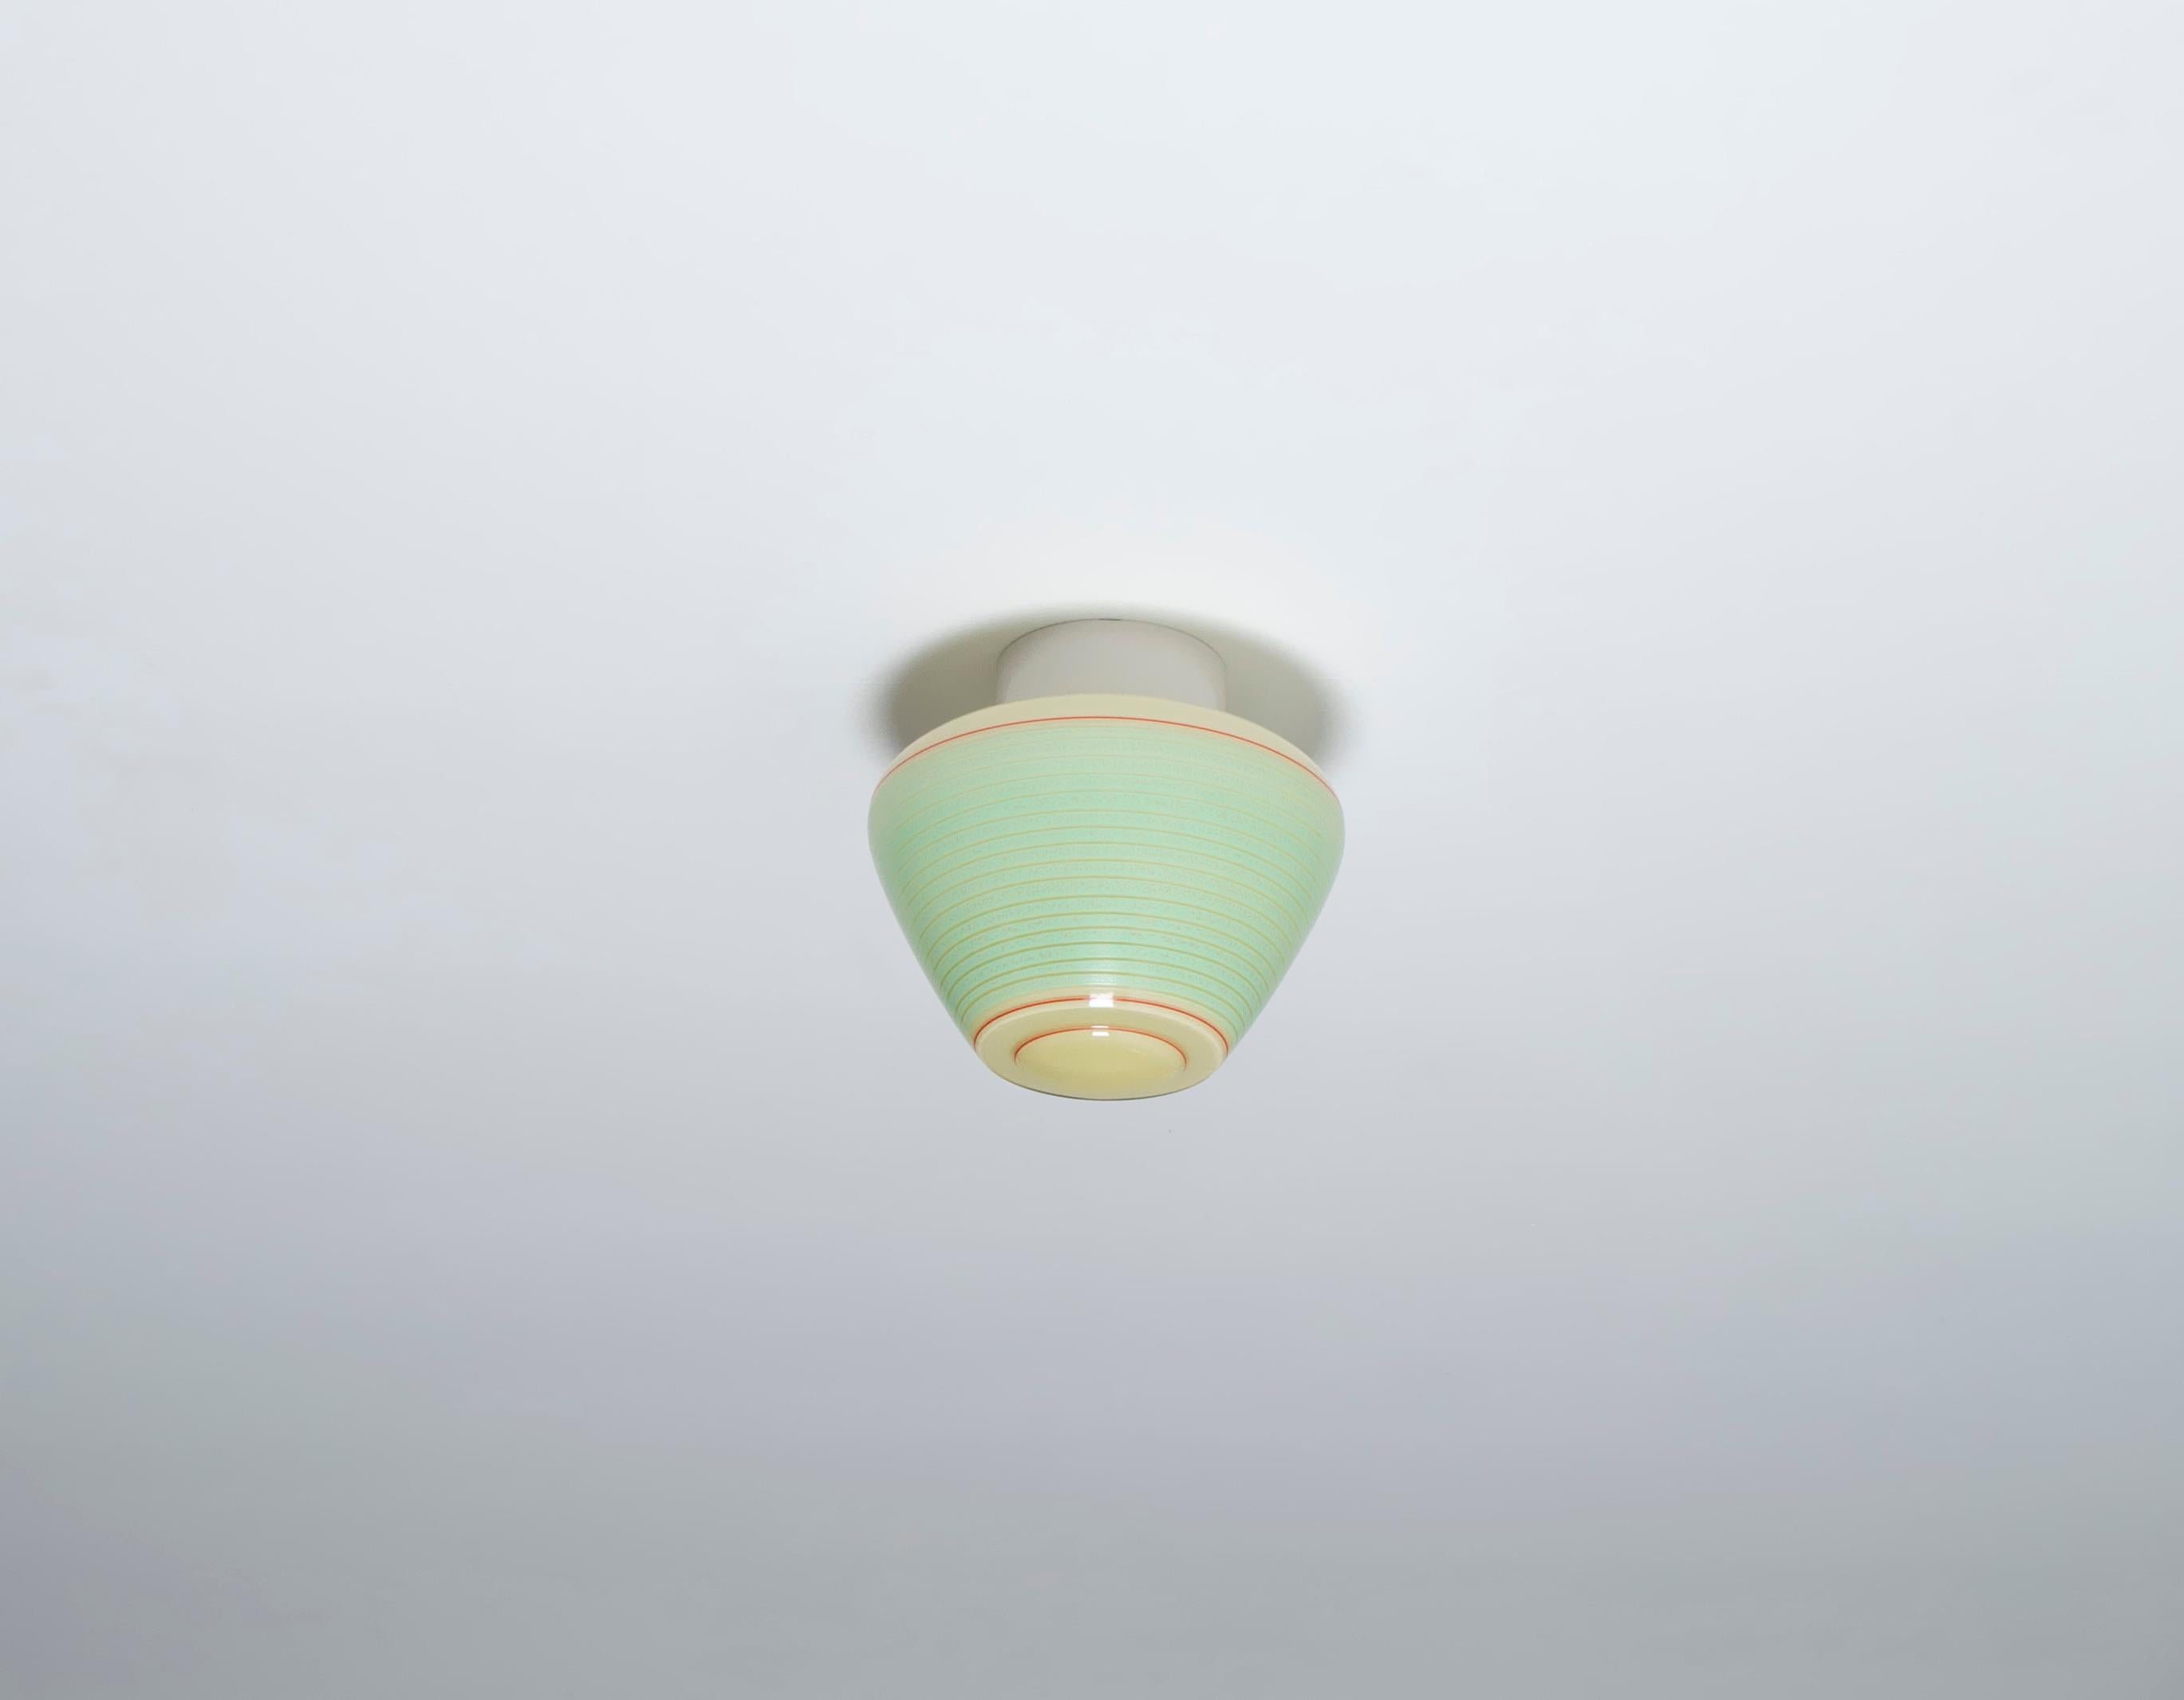 Ceiling light with painted surface and base in porcelain. Designed and made in Norway from circa 1950s first half. The lamp is fully working and in very good vintage condition. The lamp uses a E27 bulb (works in the US), and has a max wattage of 60.